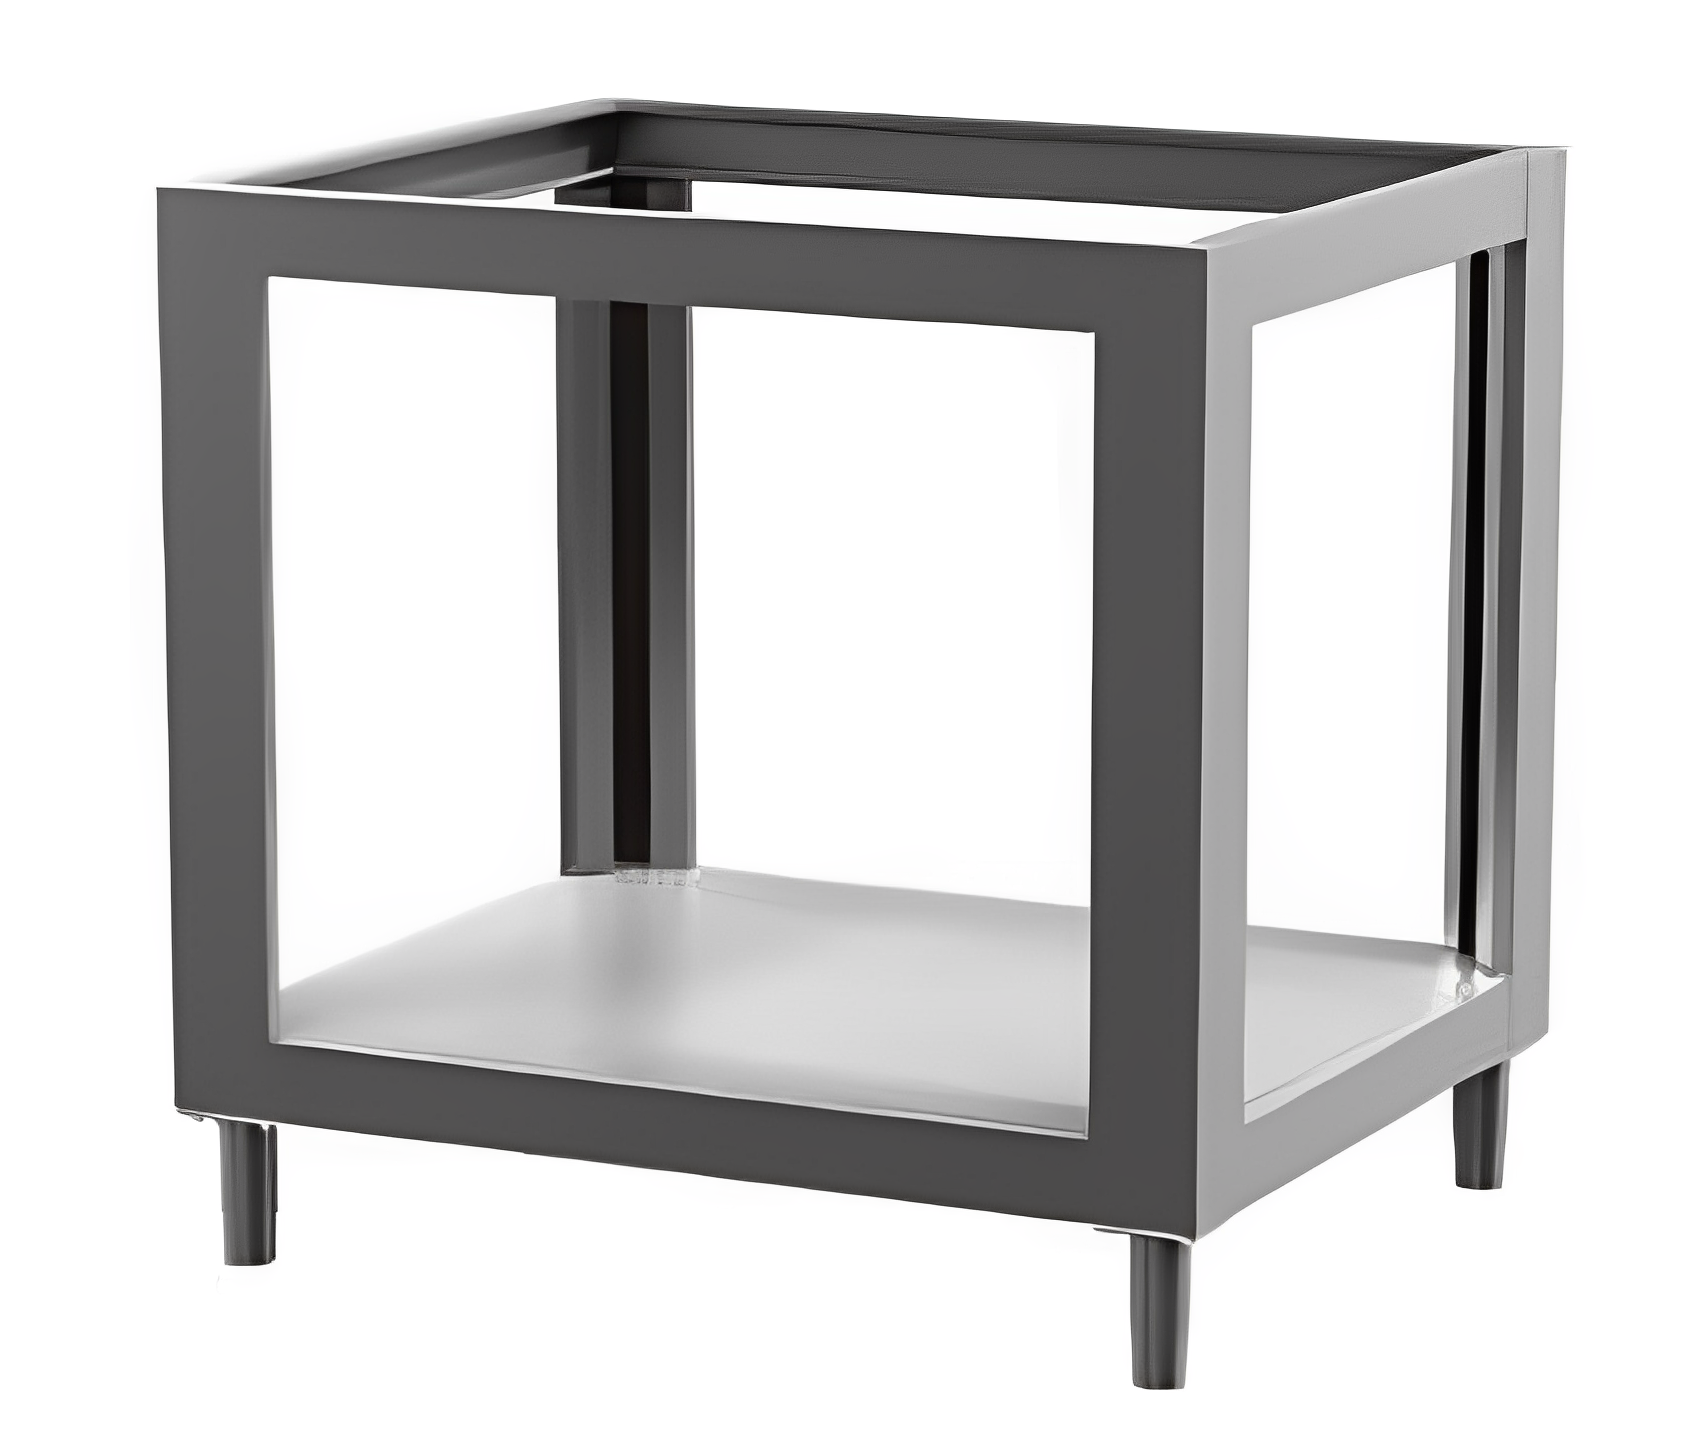 PIZZAGROUP S6+6 Stands in stainless steel, with service shelf.